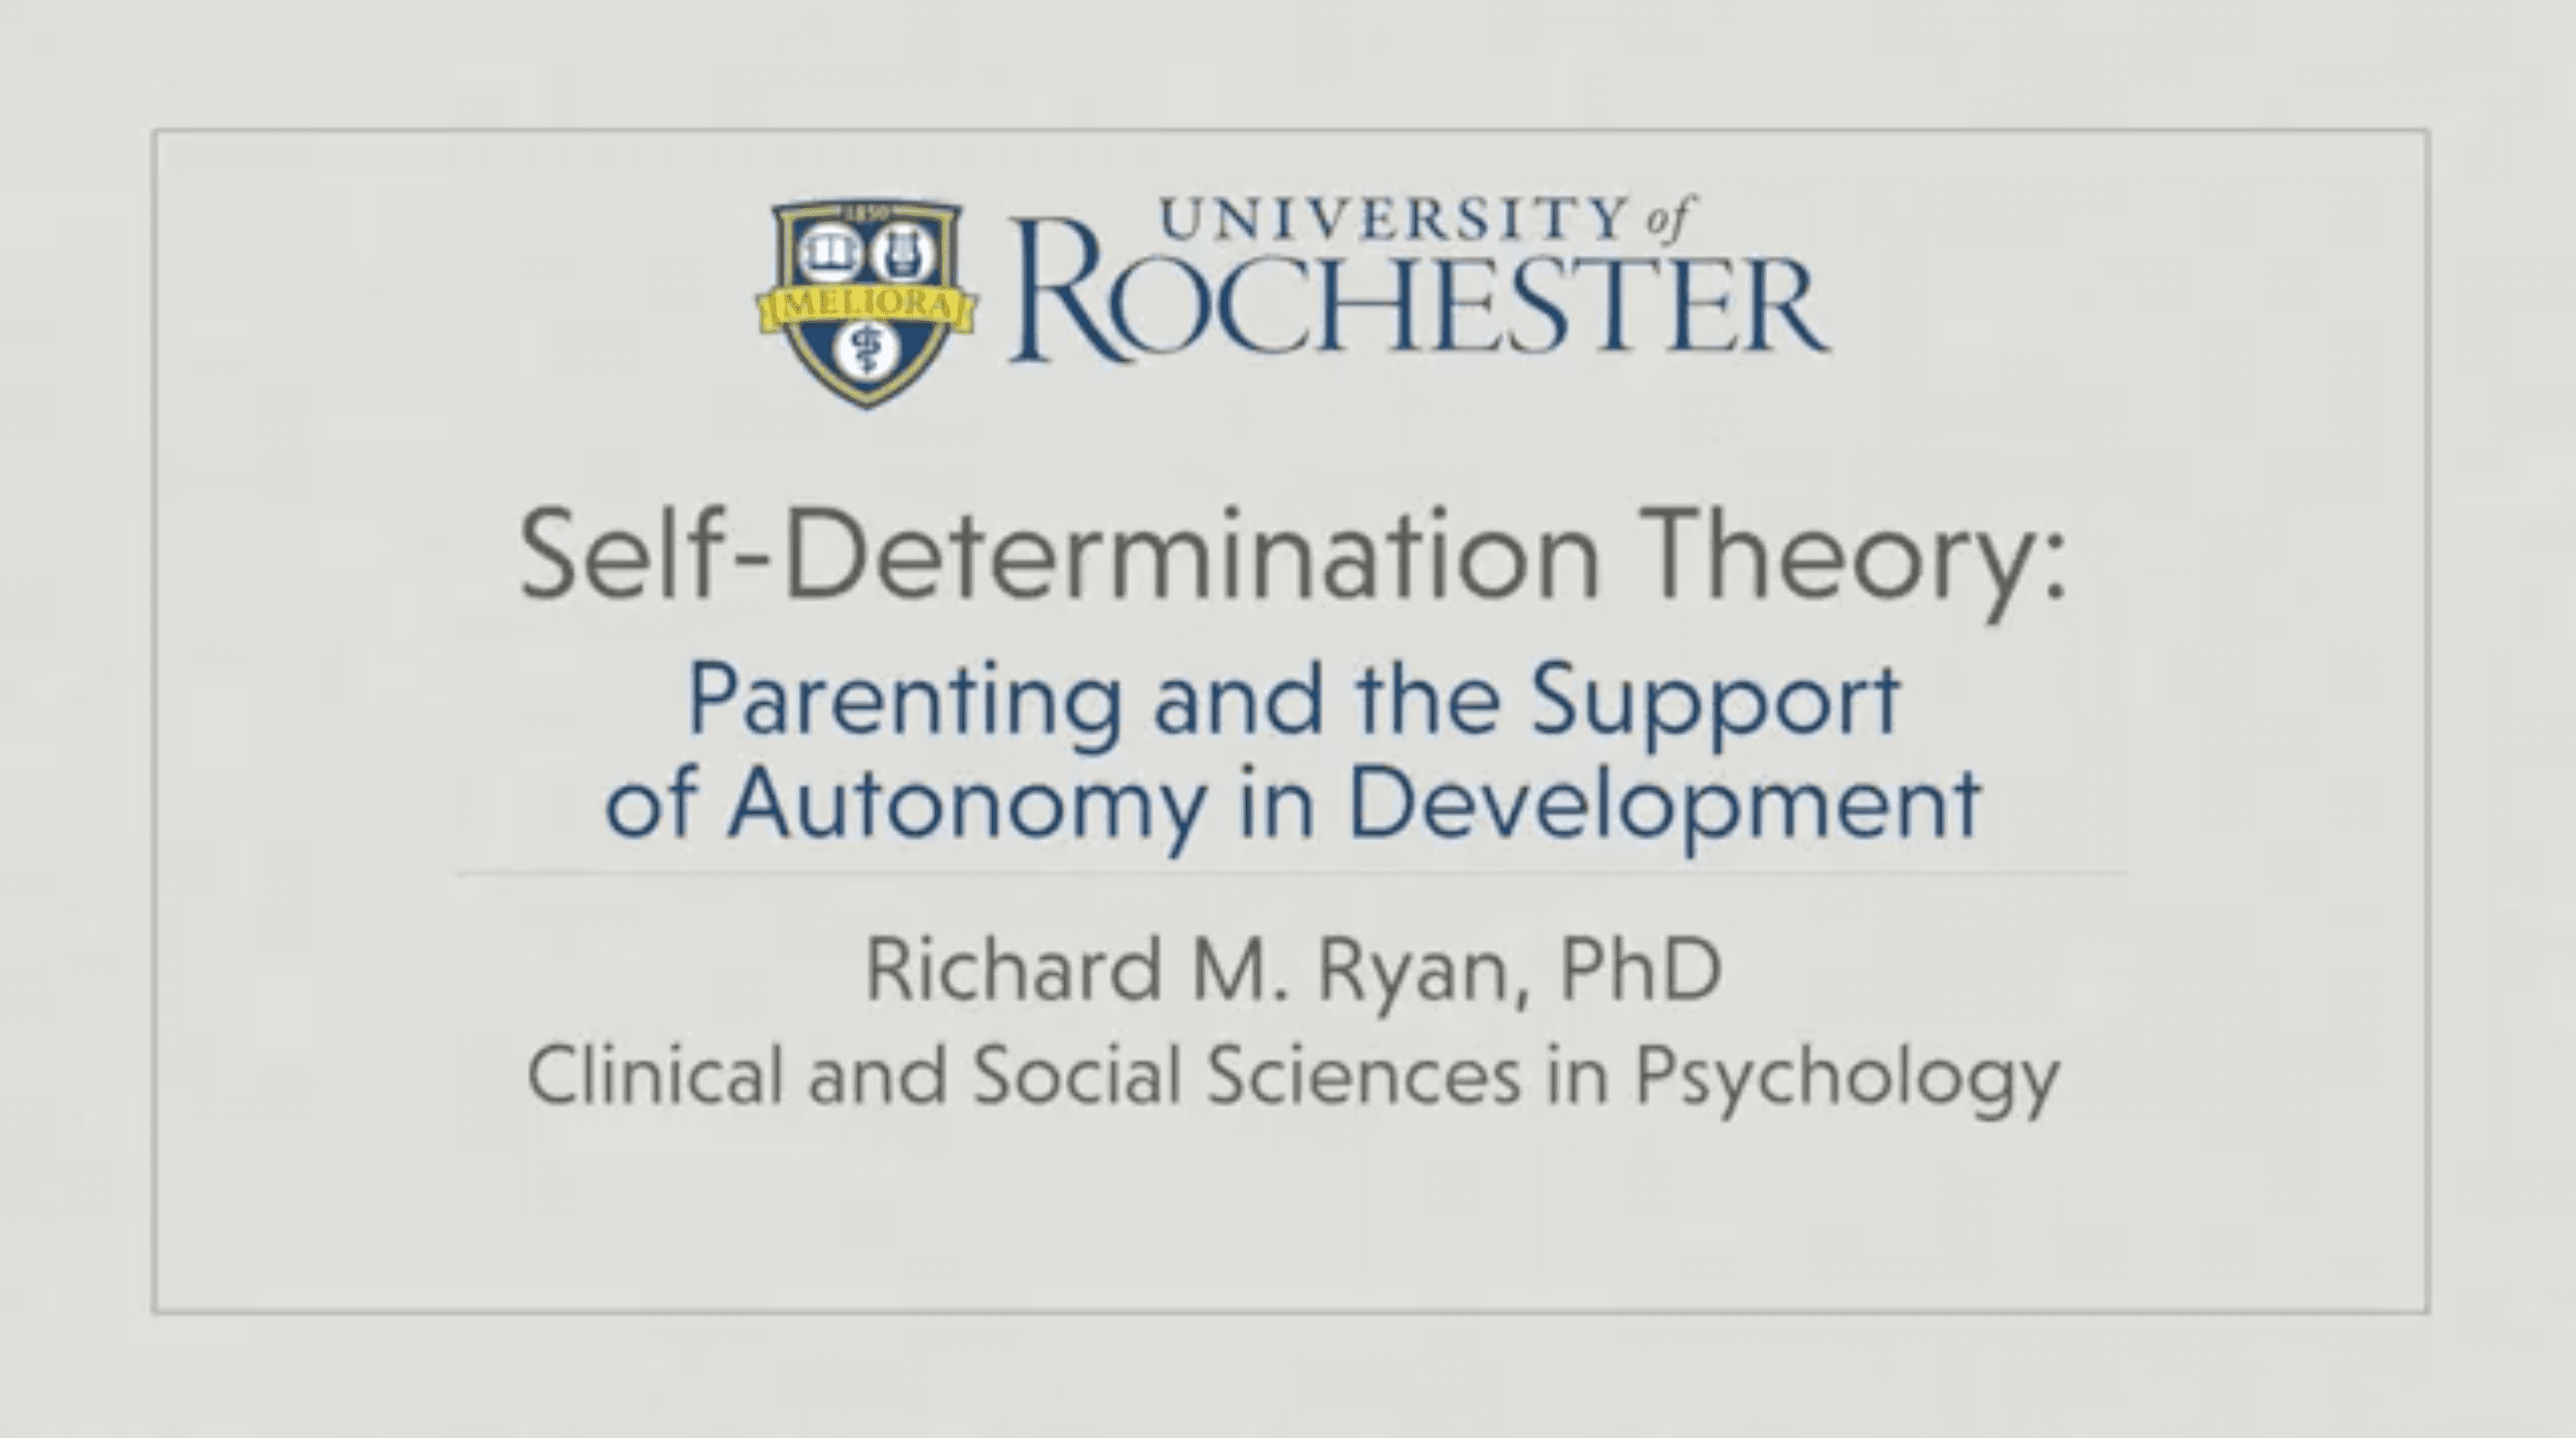 Parenting and the Support of Autonomy in Development Coursera video with Richard M Ryan